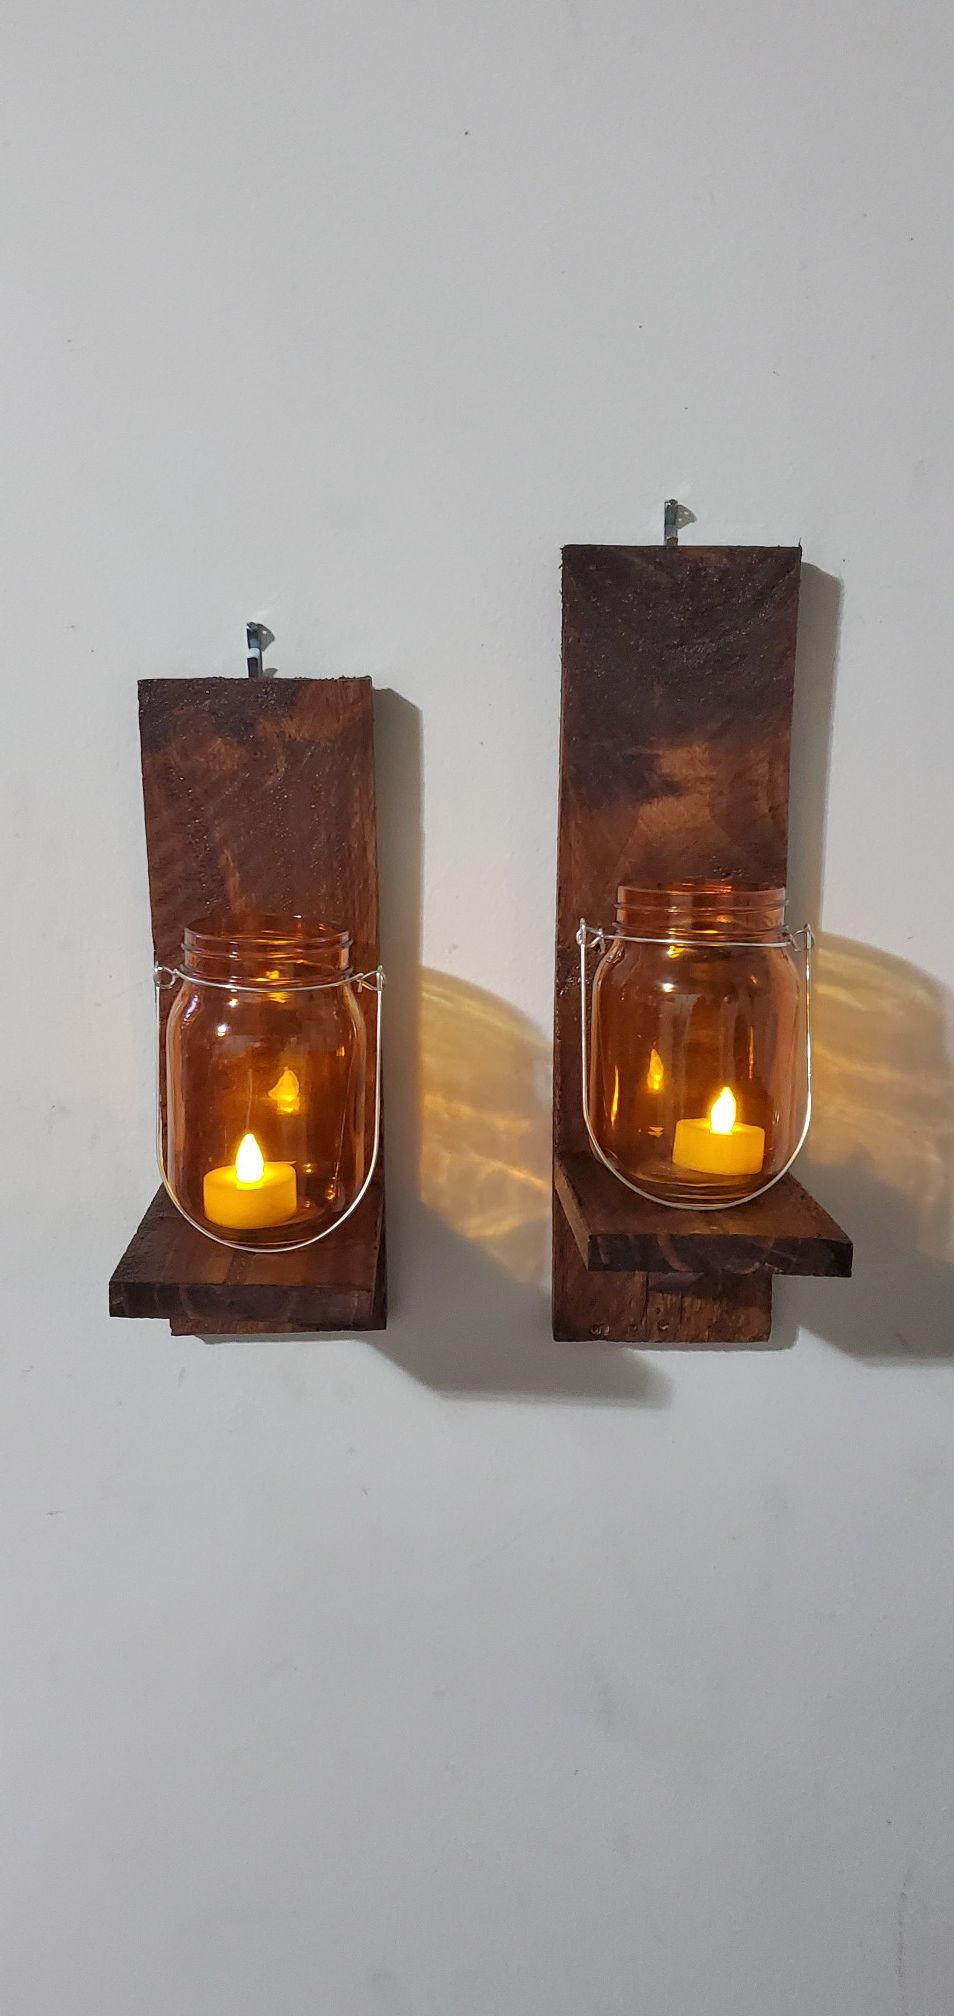 Hand crafted wall mount candle holders